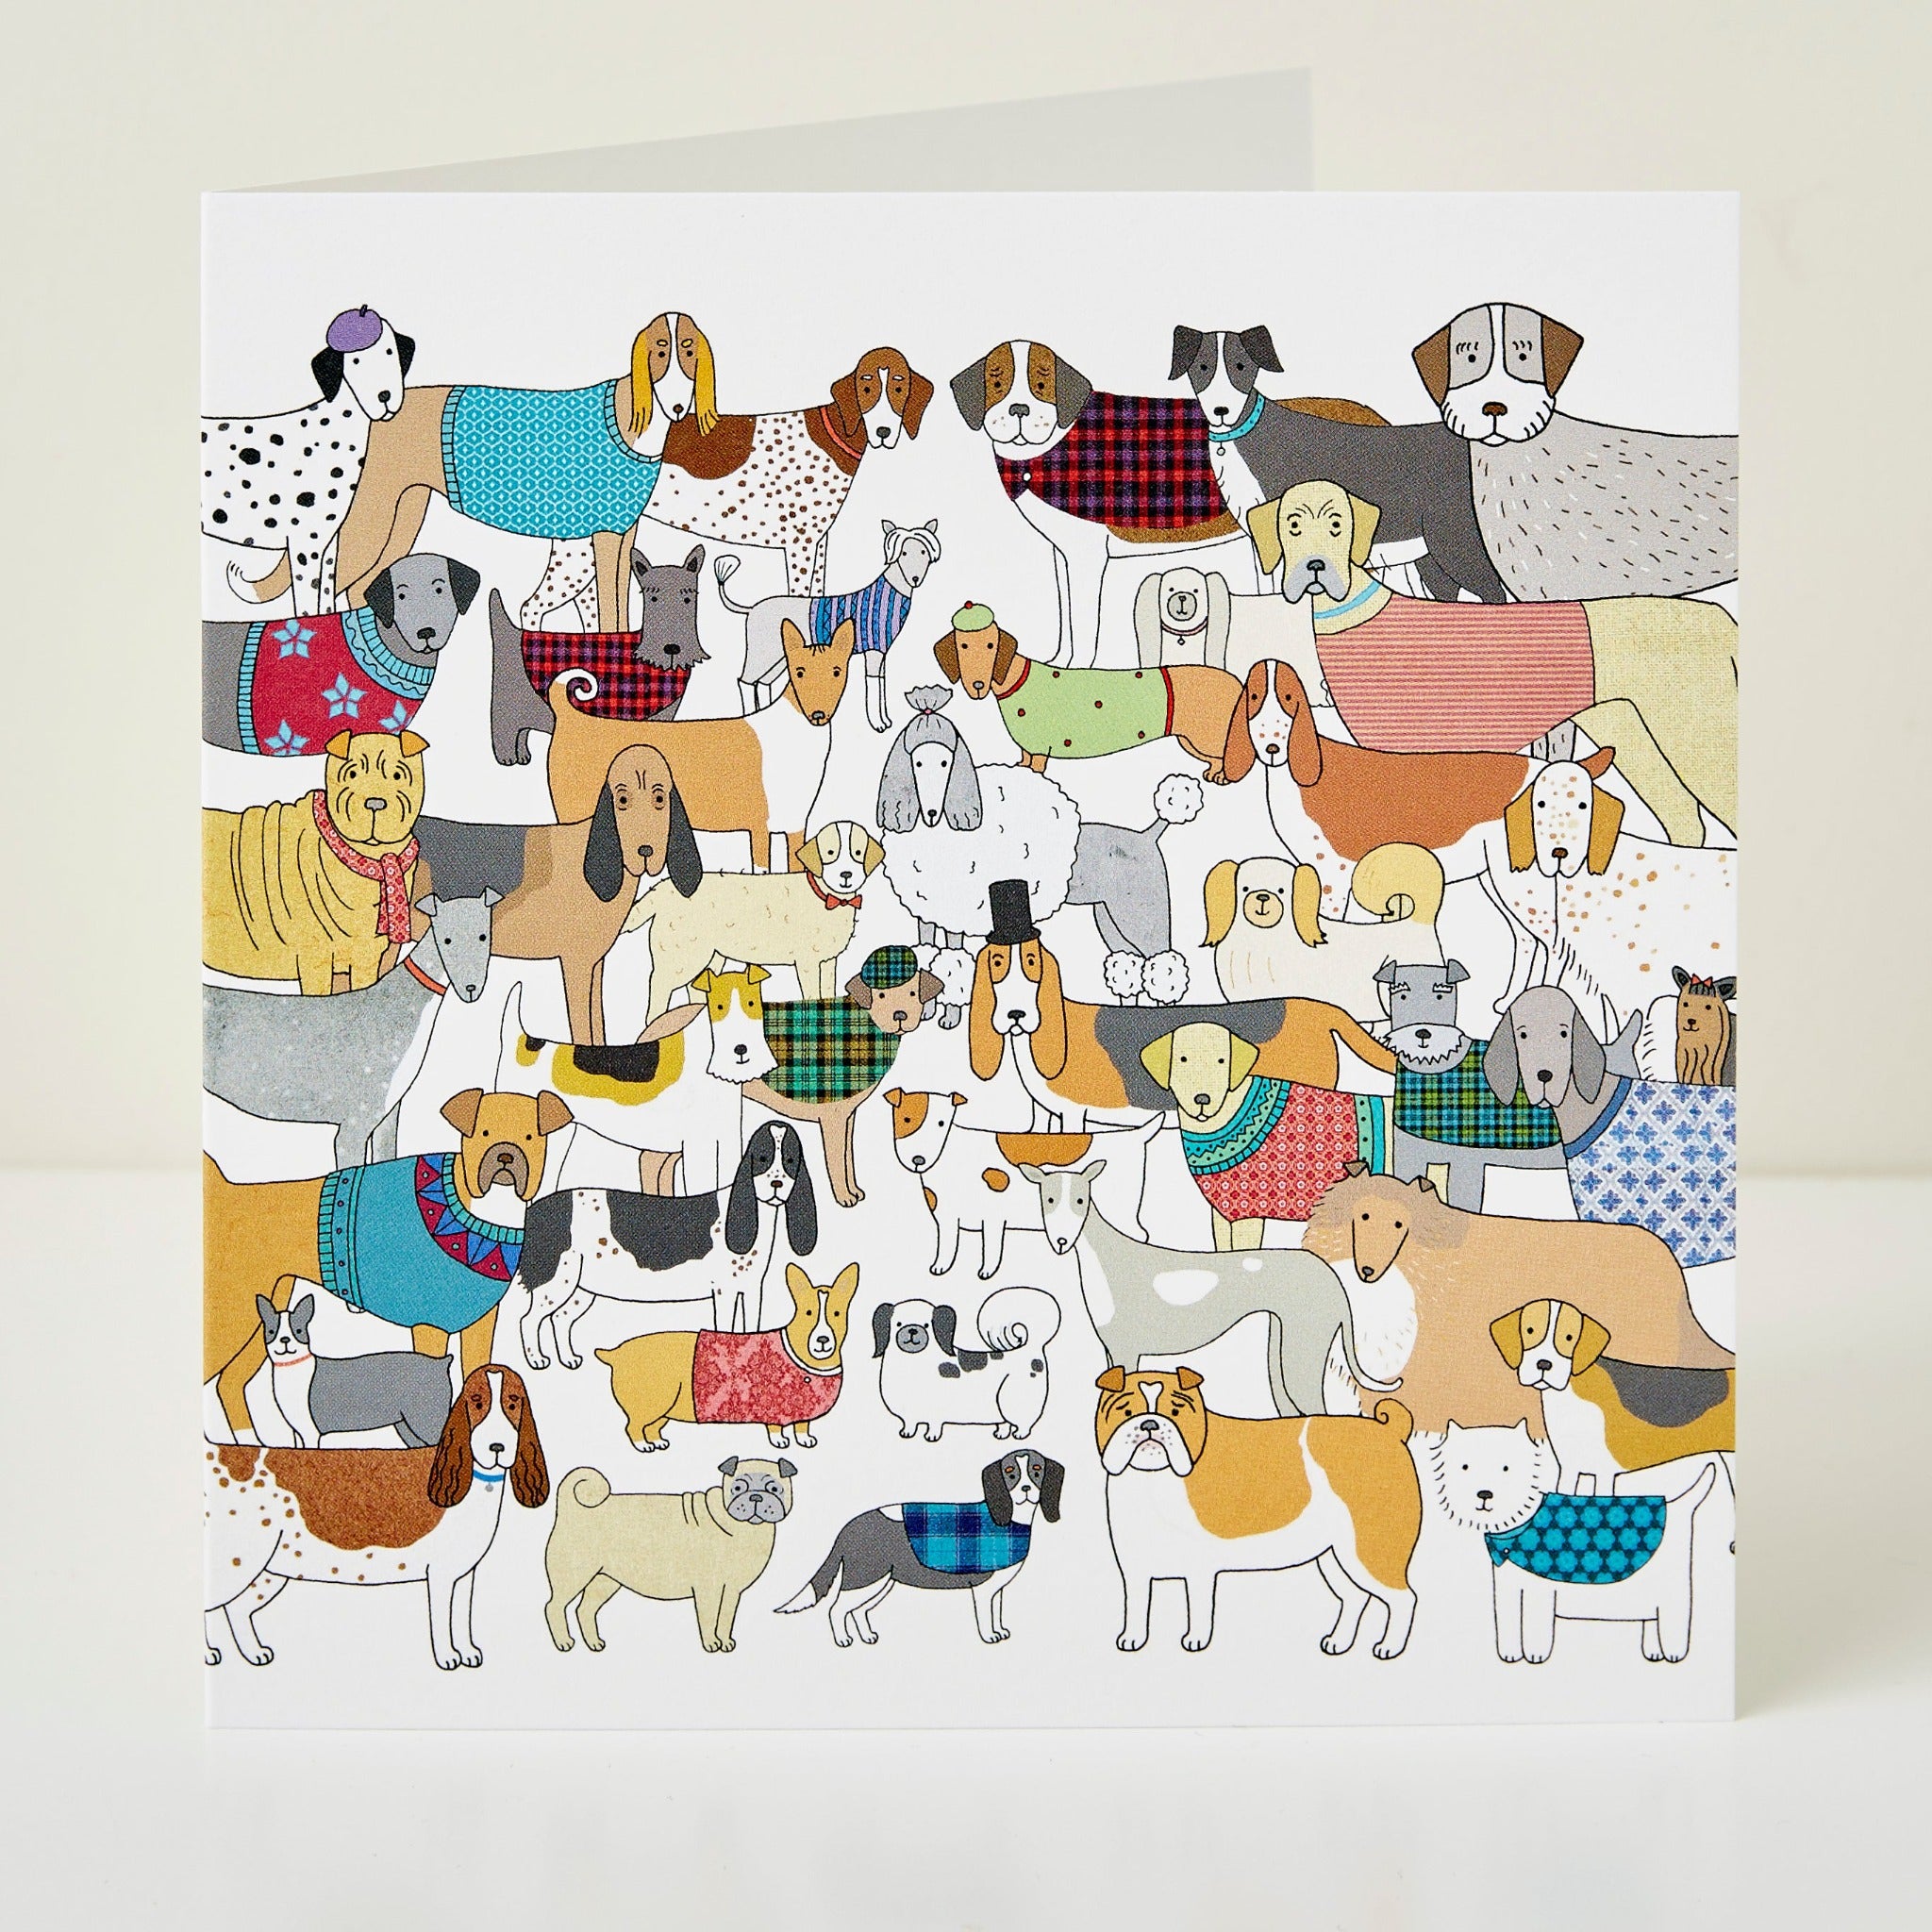 Pack of Proud Pooches Greeting Card by Mary Kilvert